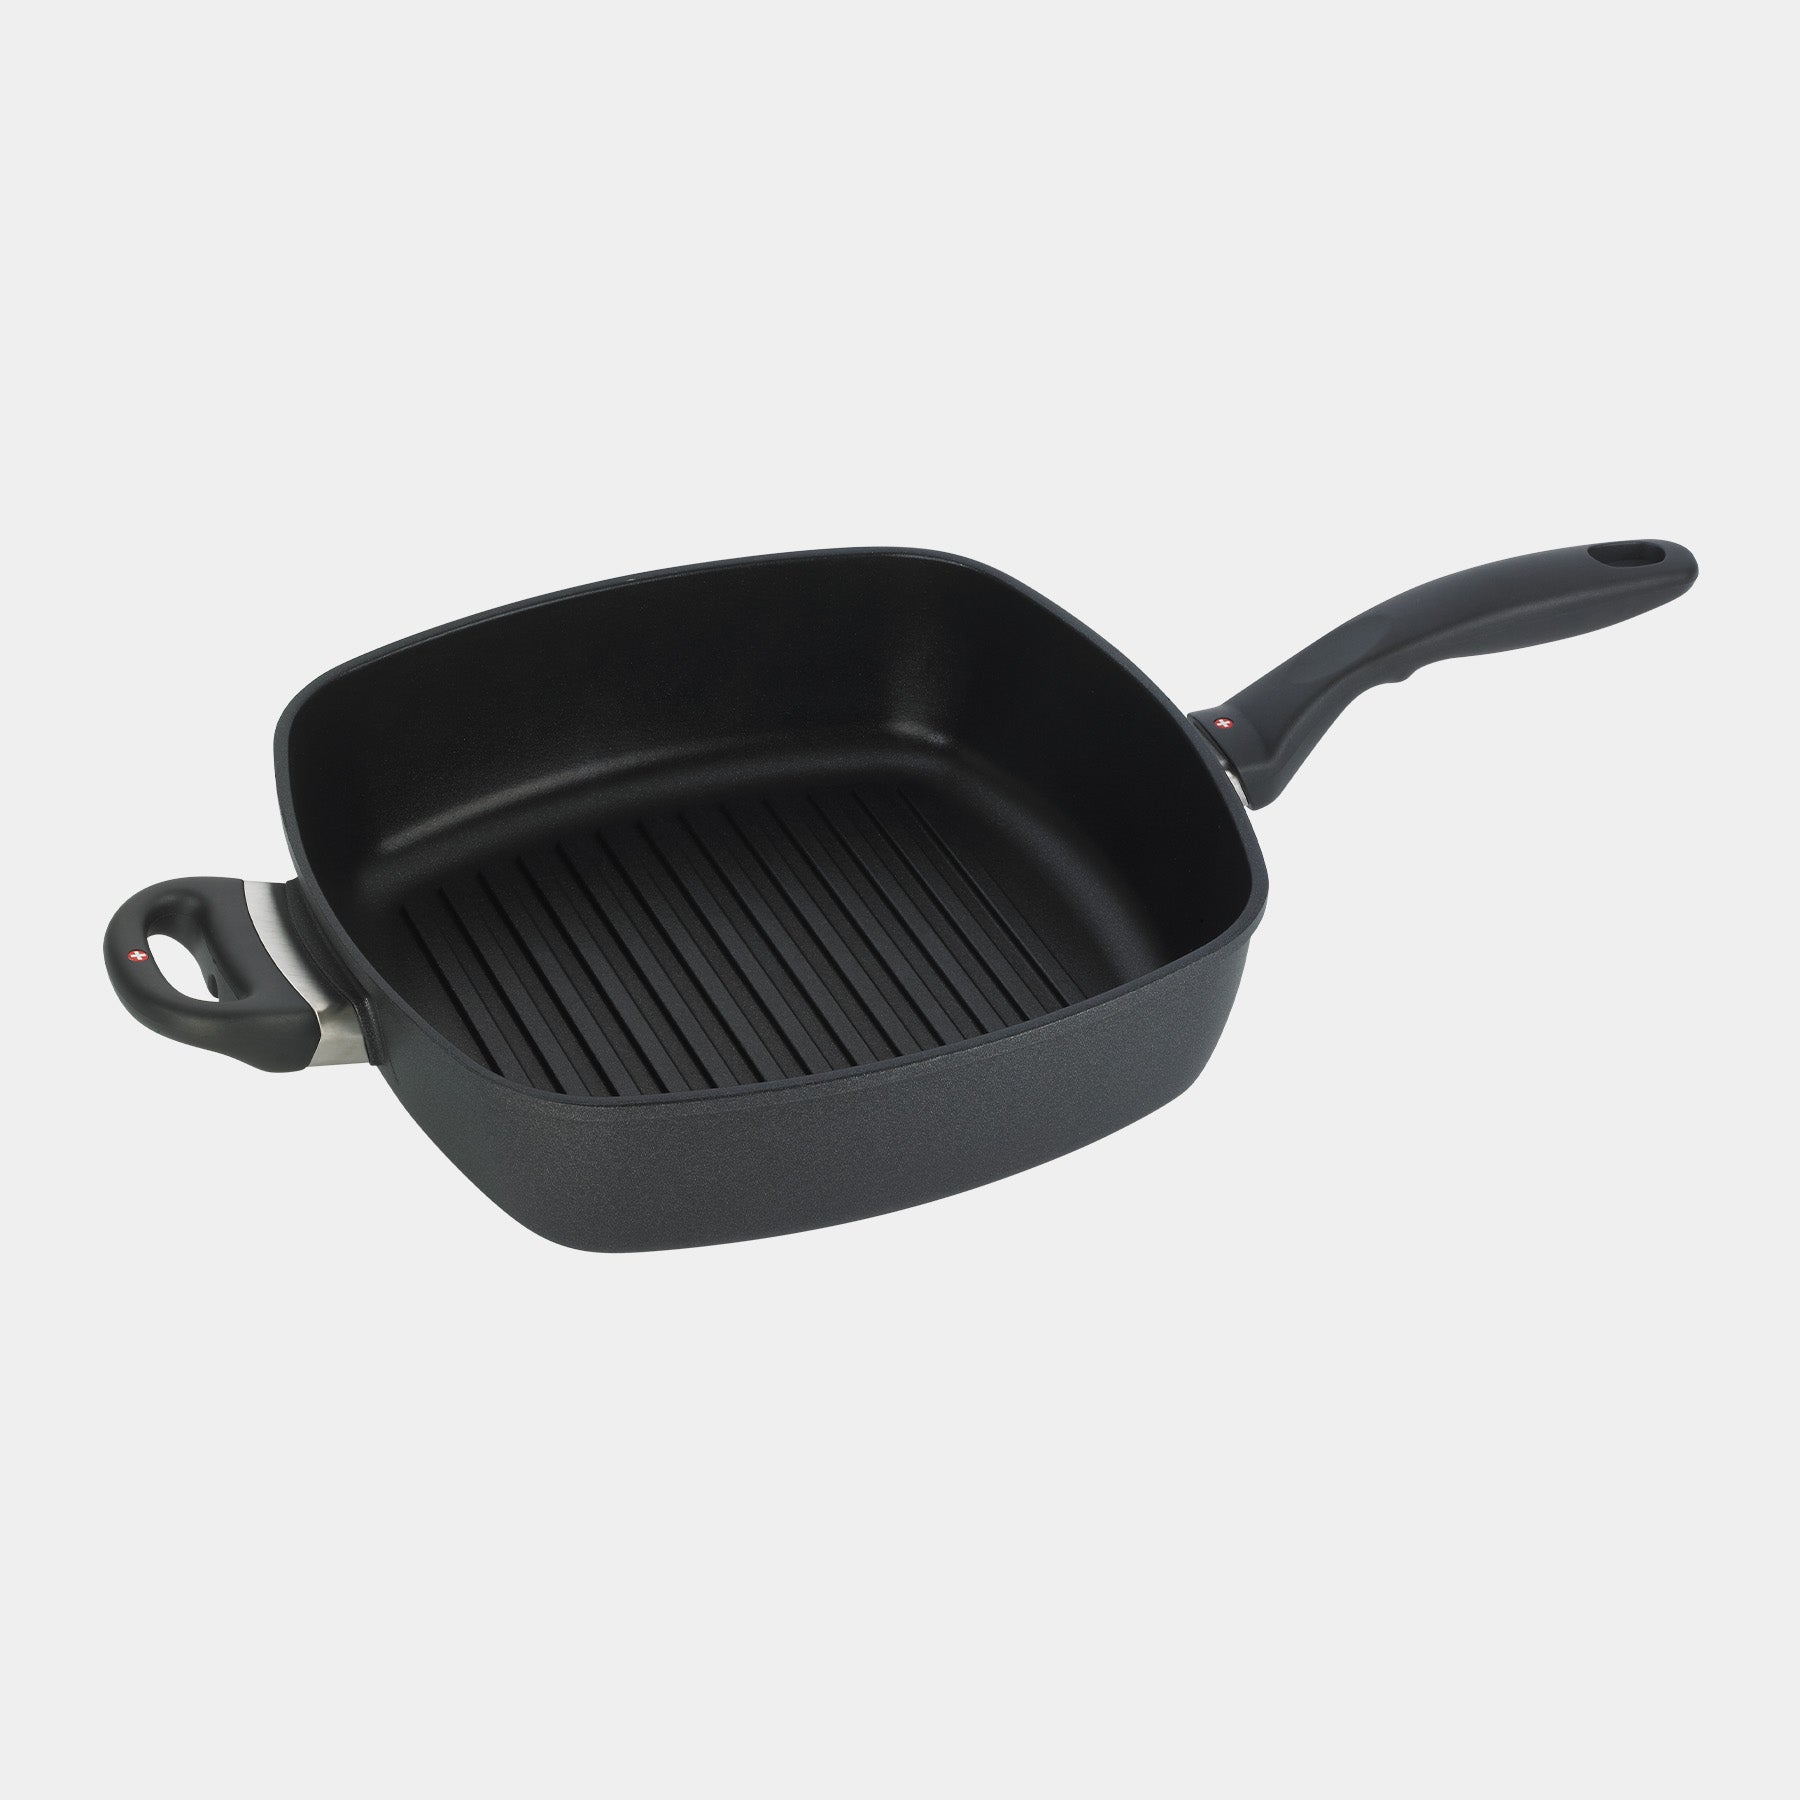 XD Nonstick 11" x 11" Deep Square Grill Pan Top View